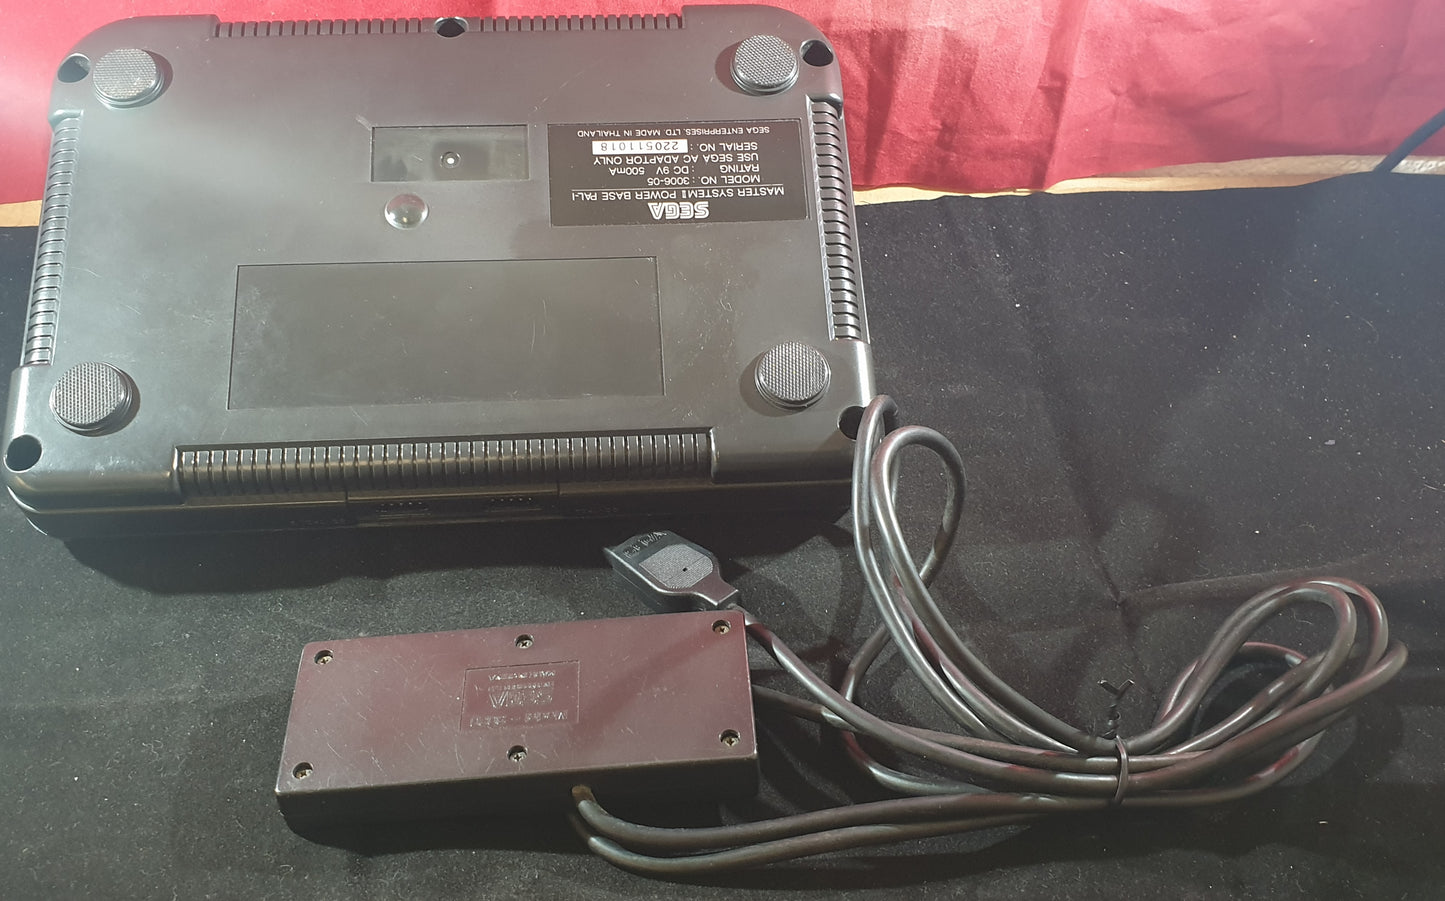 Sega Master System II with Alex Kidd Built in Console